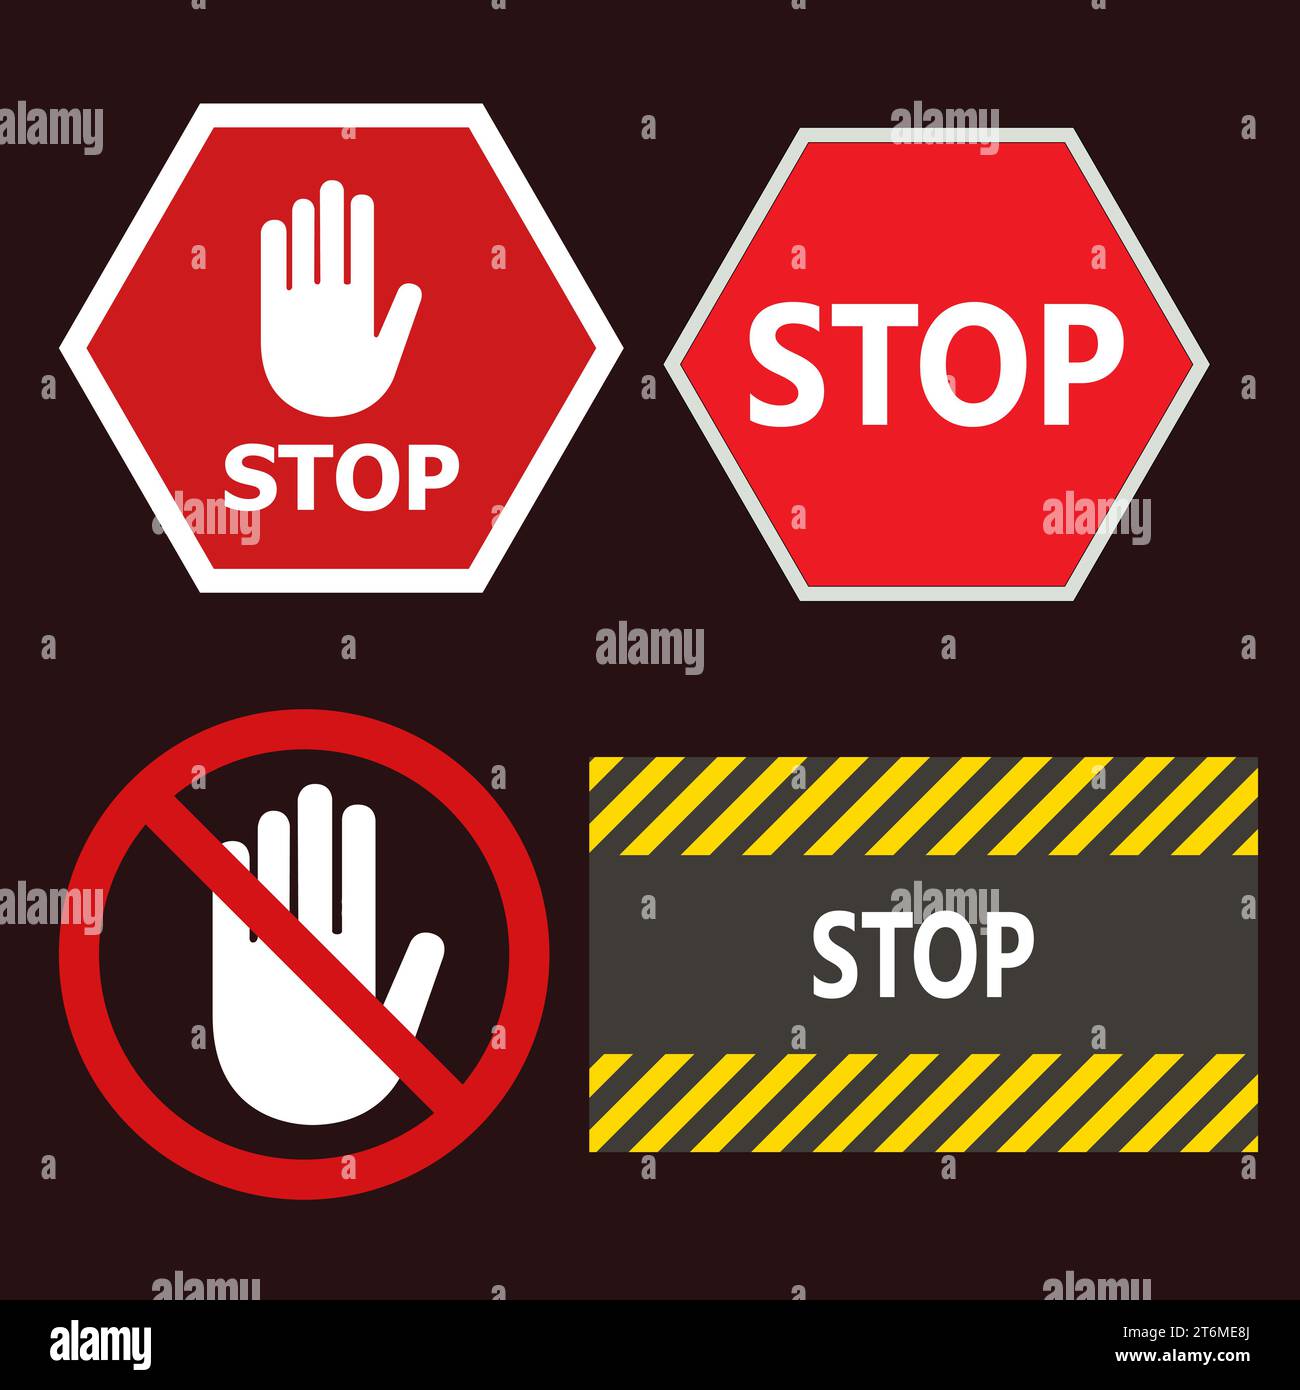 Set the stop red sign icon with a white hand, do not enter. Warning stop sign - stock vector Stock Vector